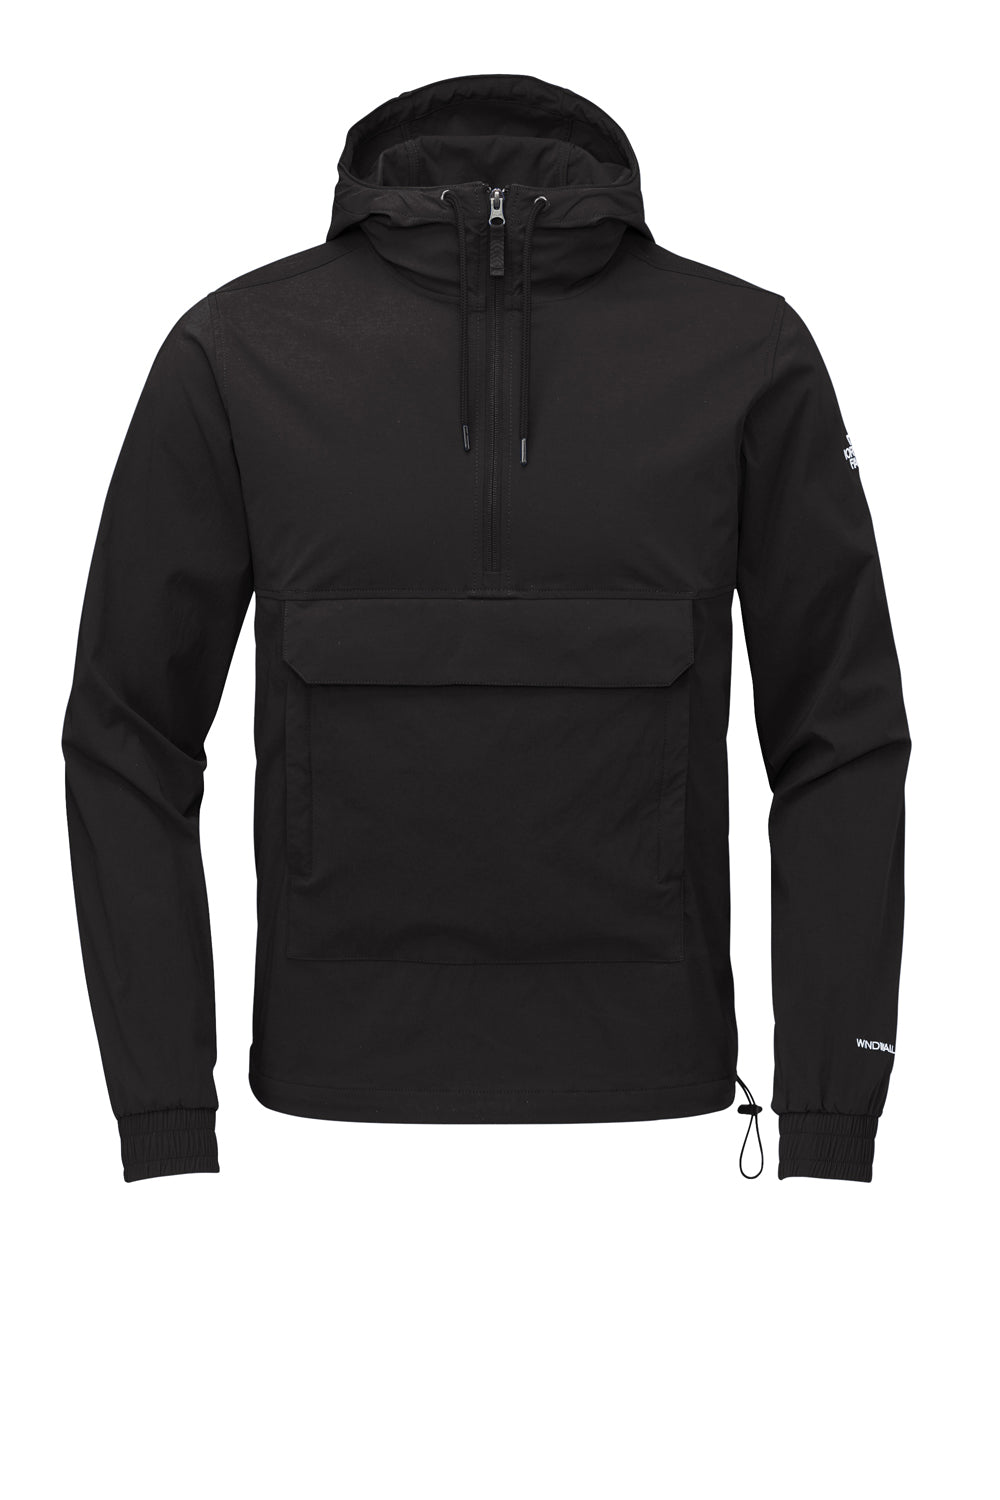 The North Face NF0A5IRW Wind & Water Resistant Packable 1/4 Zip Anorak Hooded Jacket Black Flat Front